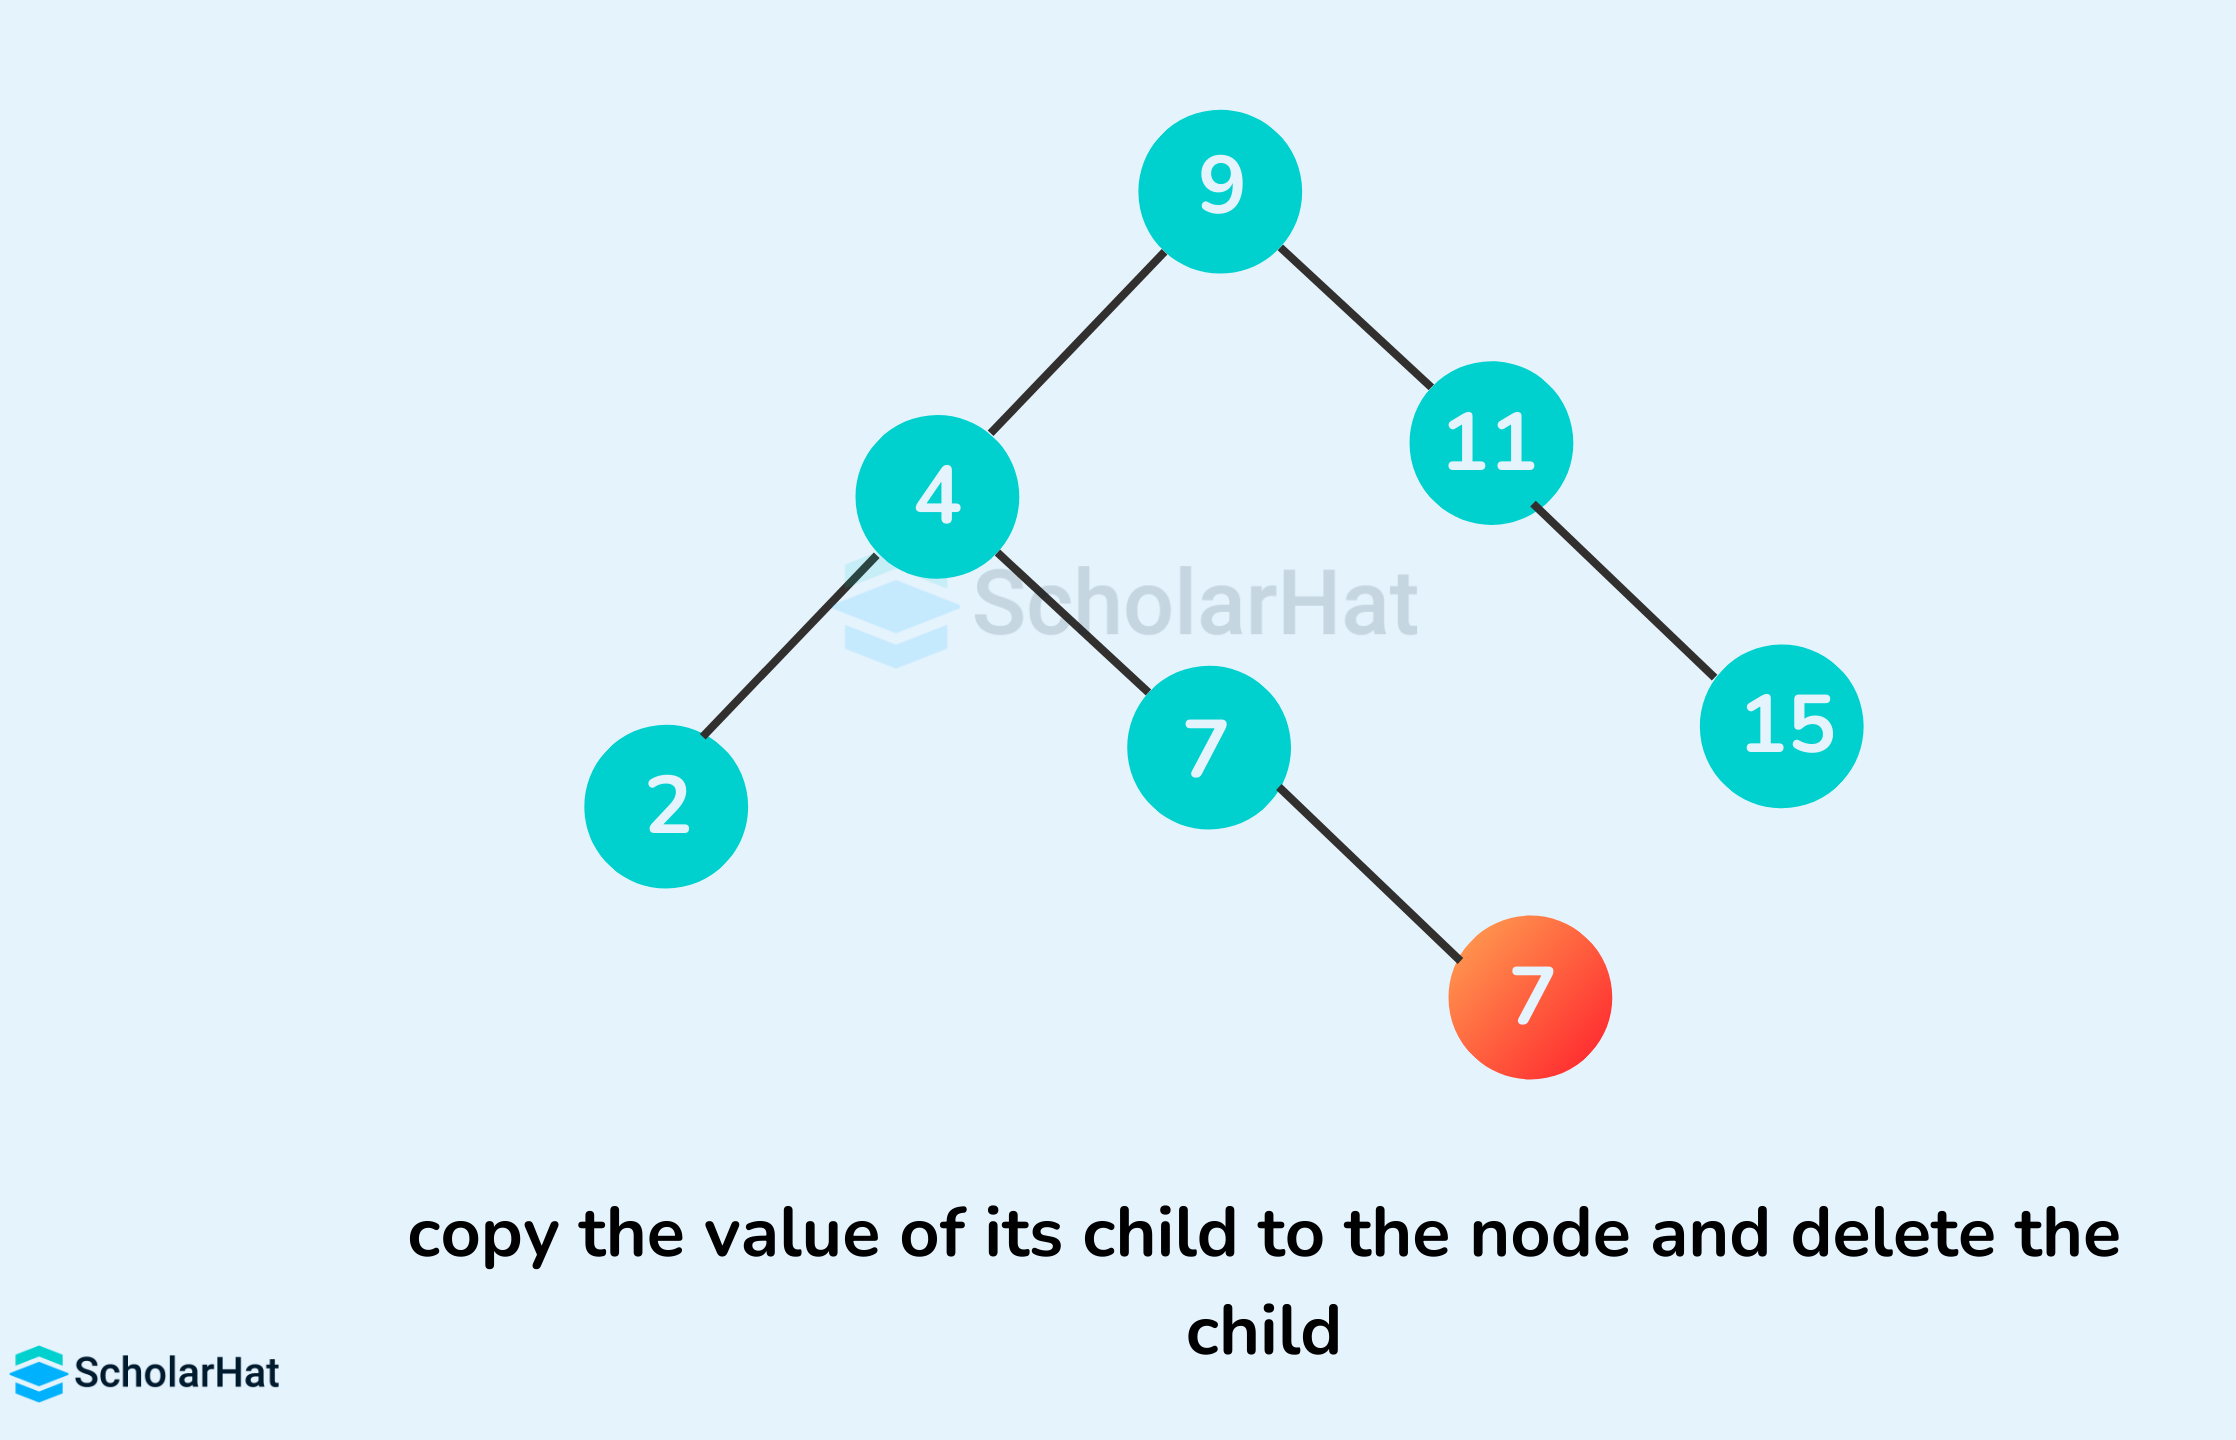 copy the value of its child to the node and delete the child